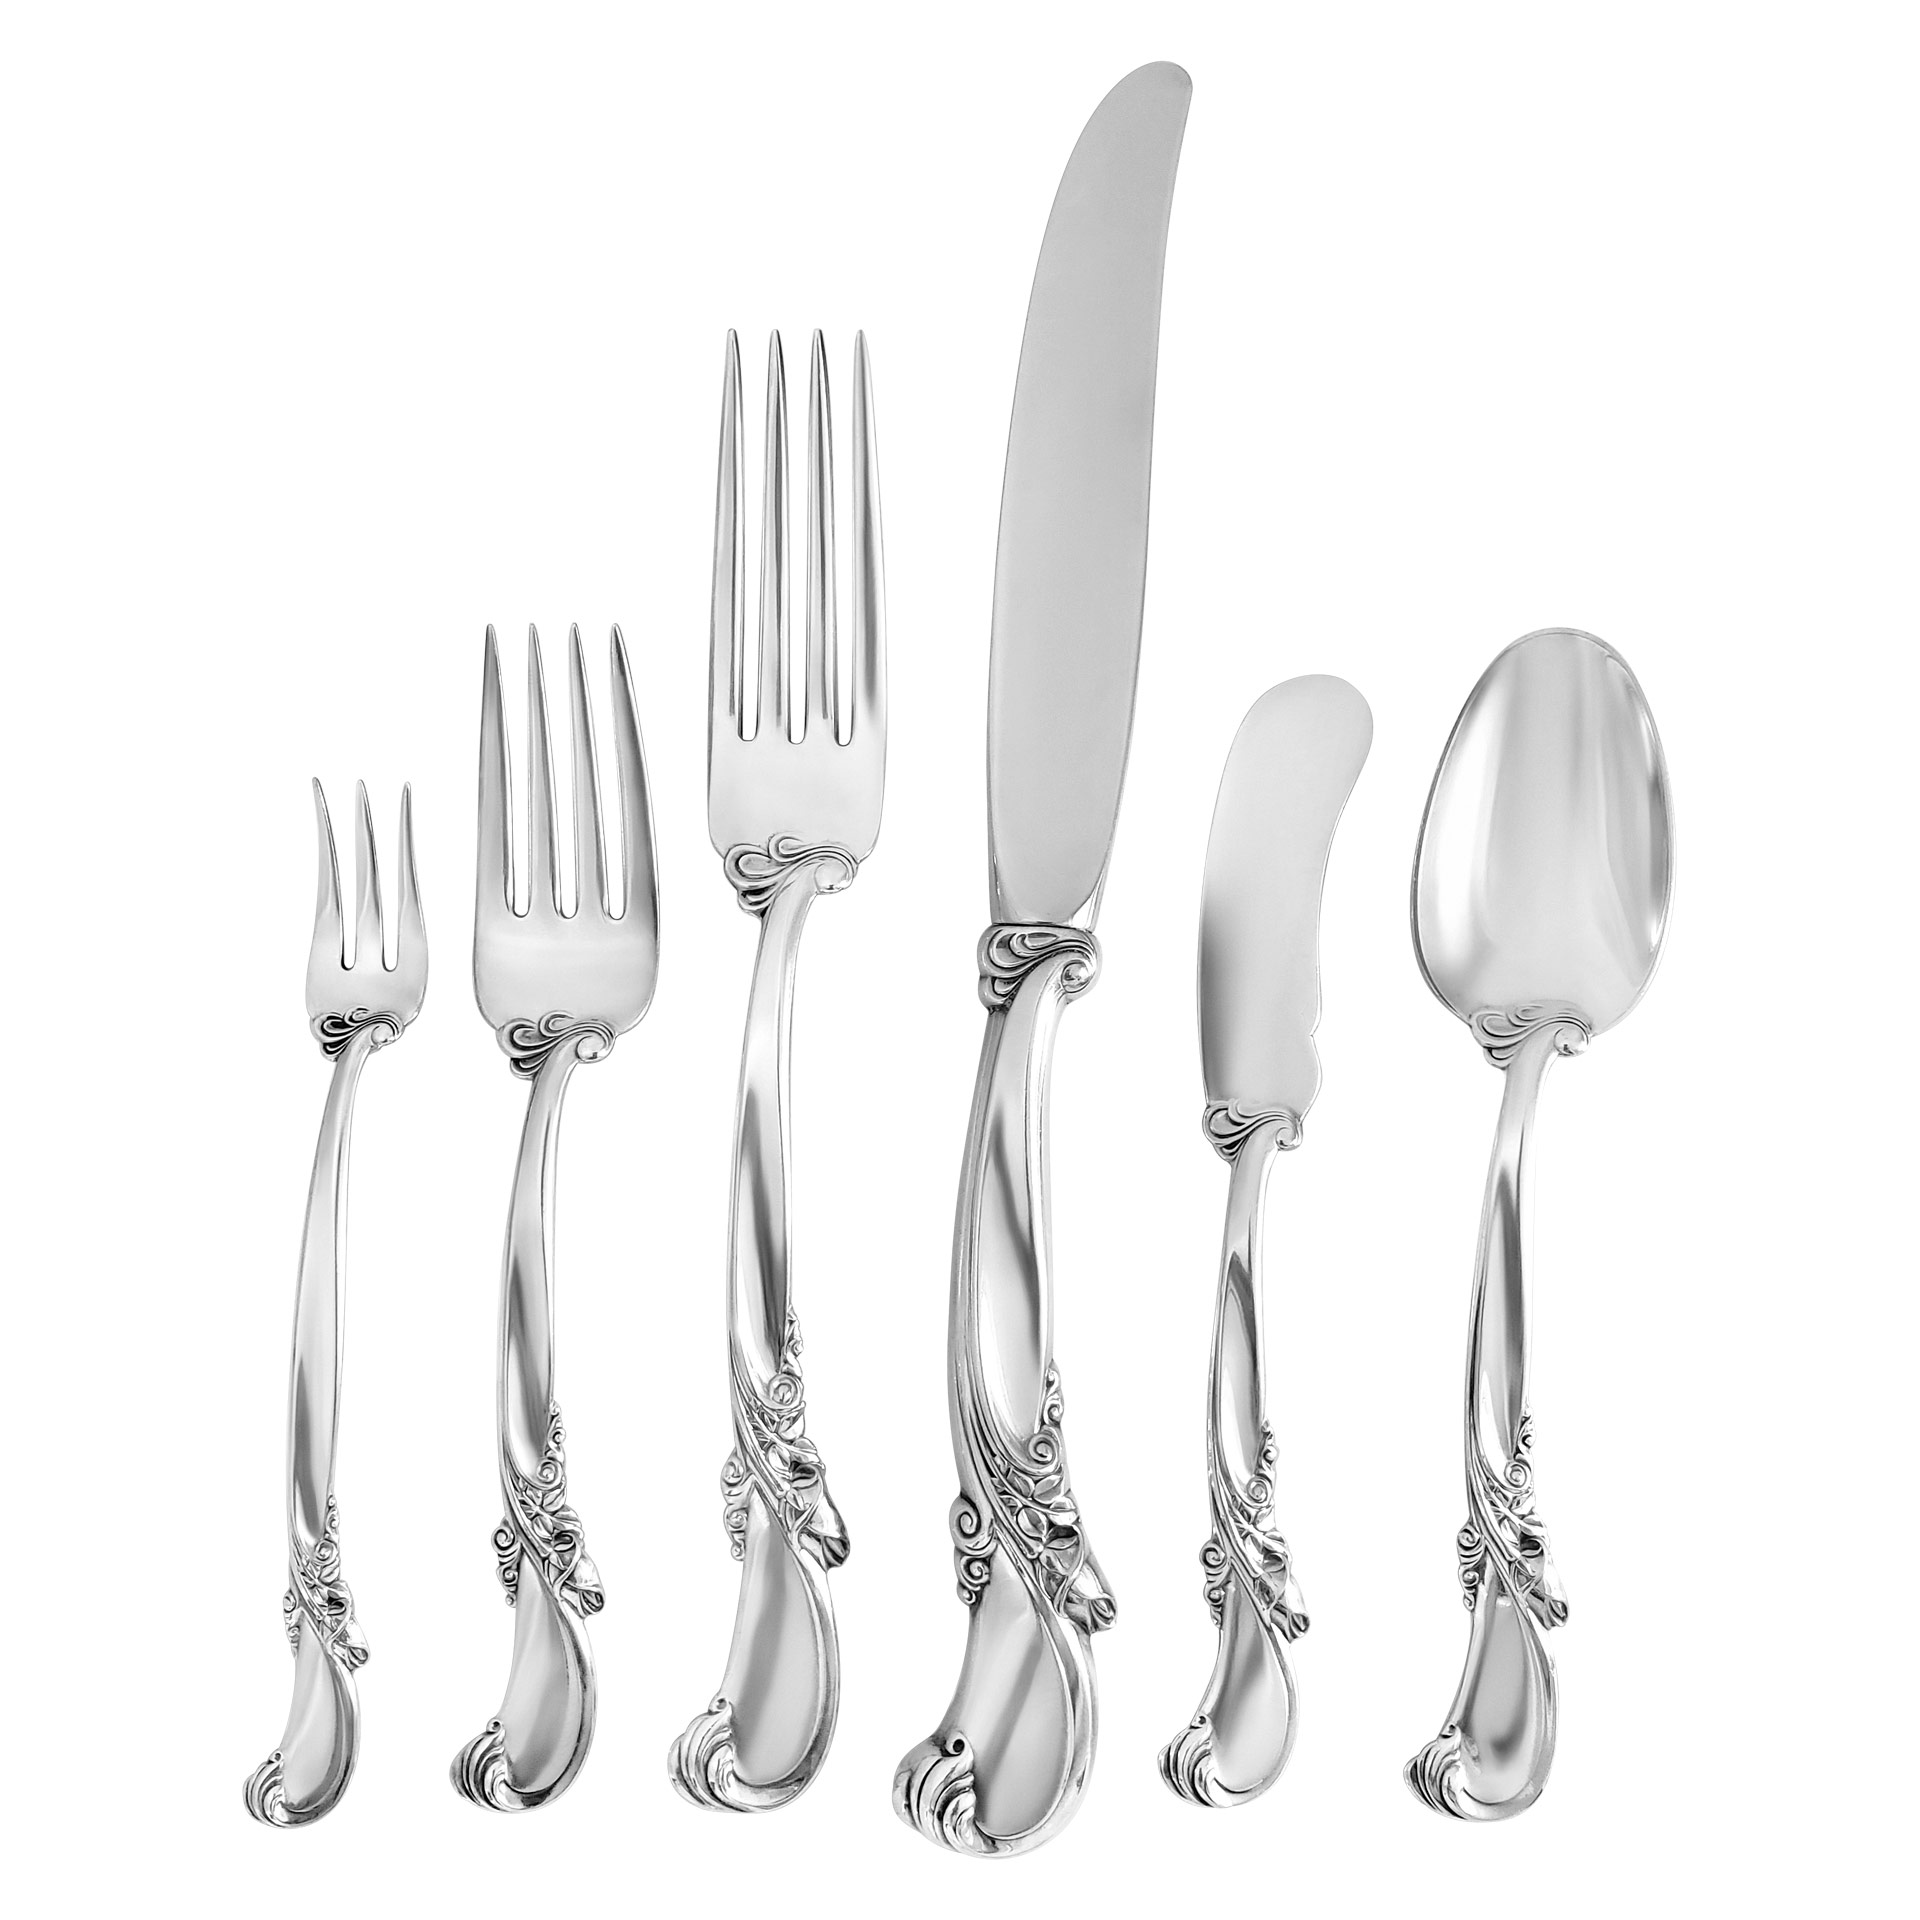 "WALTZ of SPRING" sterling silver flatware set patented by Wallace in 1952- 6 Place Setting x 12 + 5 serving pieces. Over 2900 grams sterling silver.